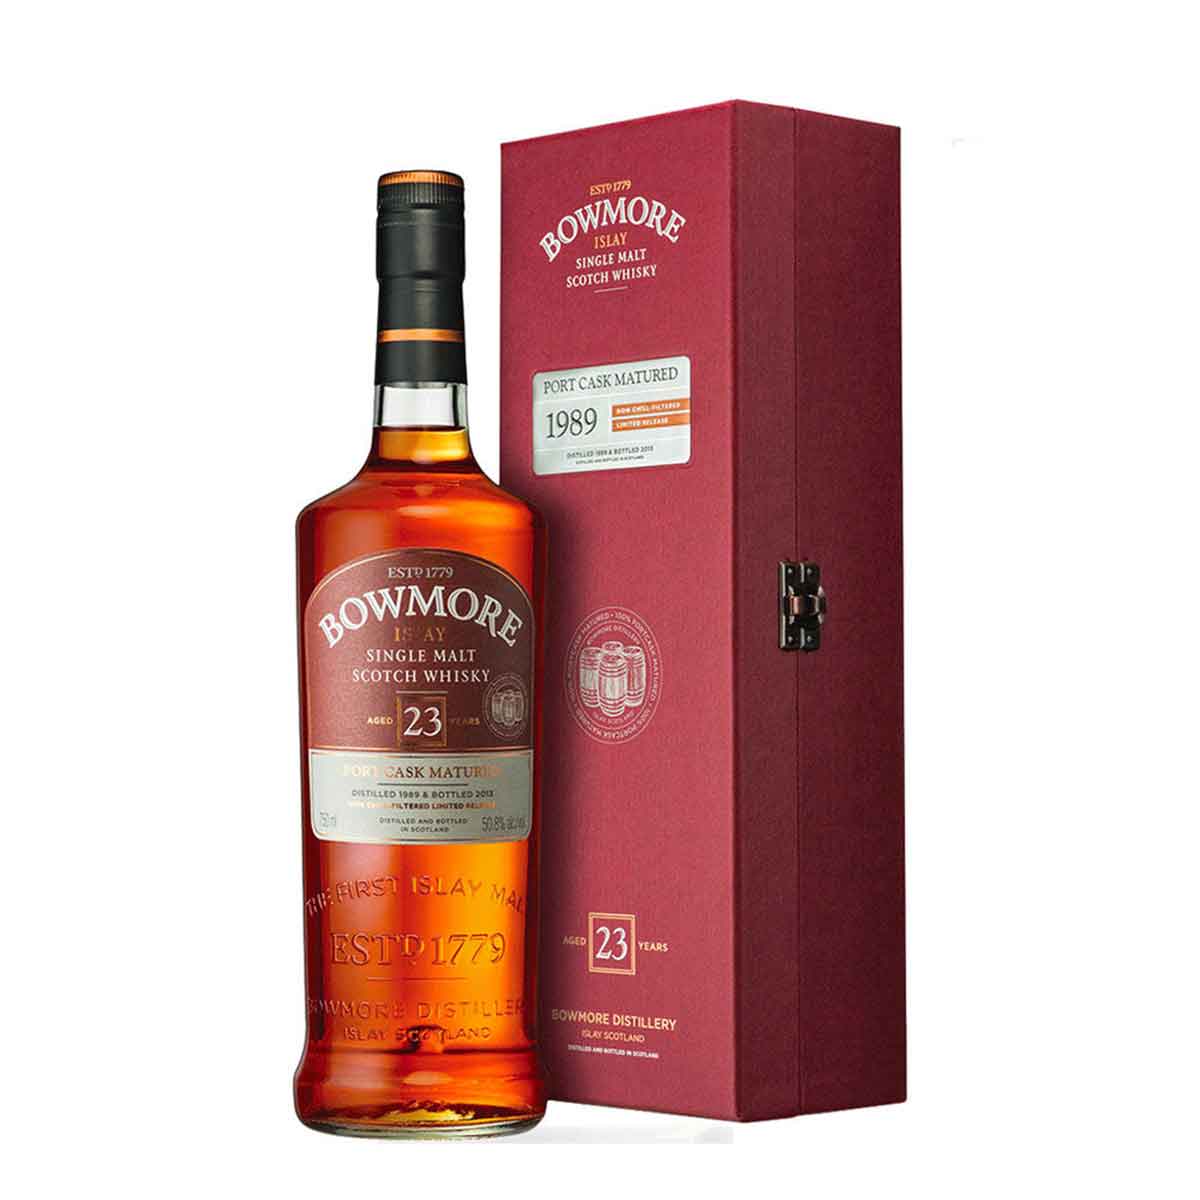 TAG Liquor Stores BC-Bowmore 23 Year Old Port Cask Matured Single Malt Scotch Whisky 750ml